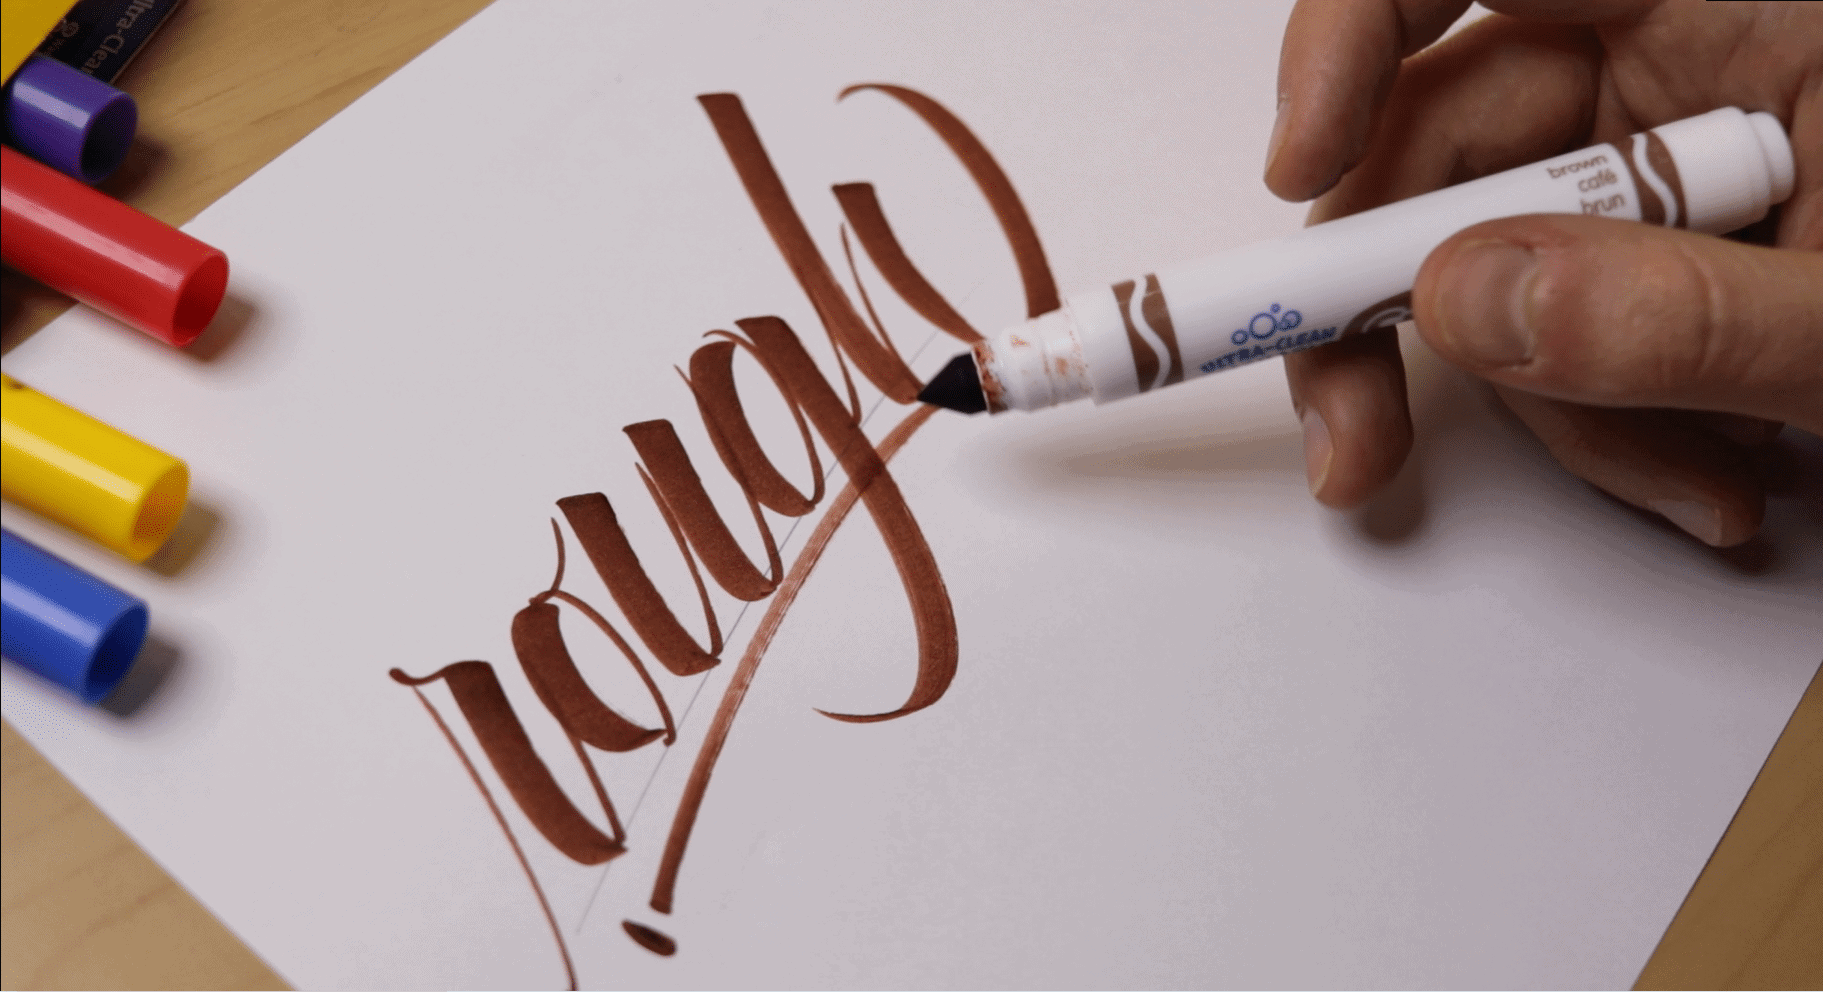 https://www.lettering-daily.com/wp-content/uploads/2020/10/Screenshot-186.png